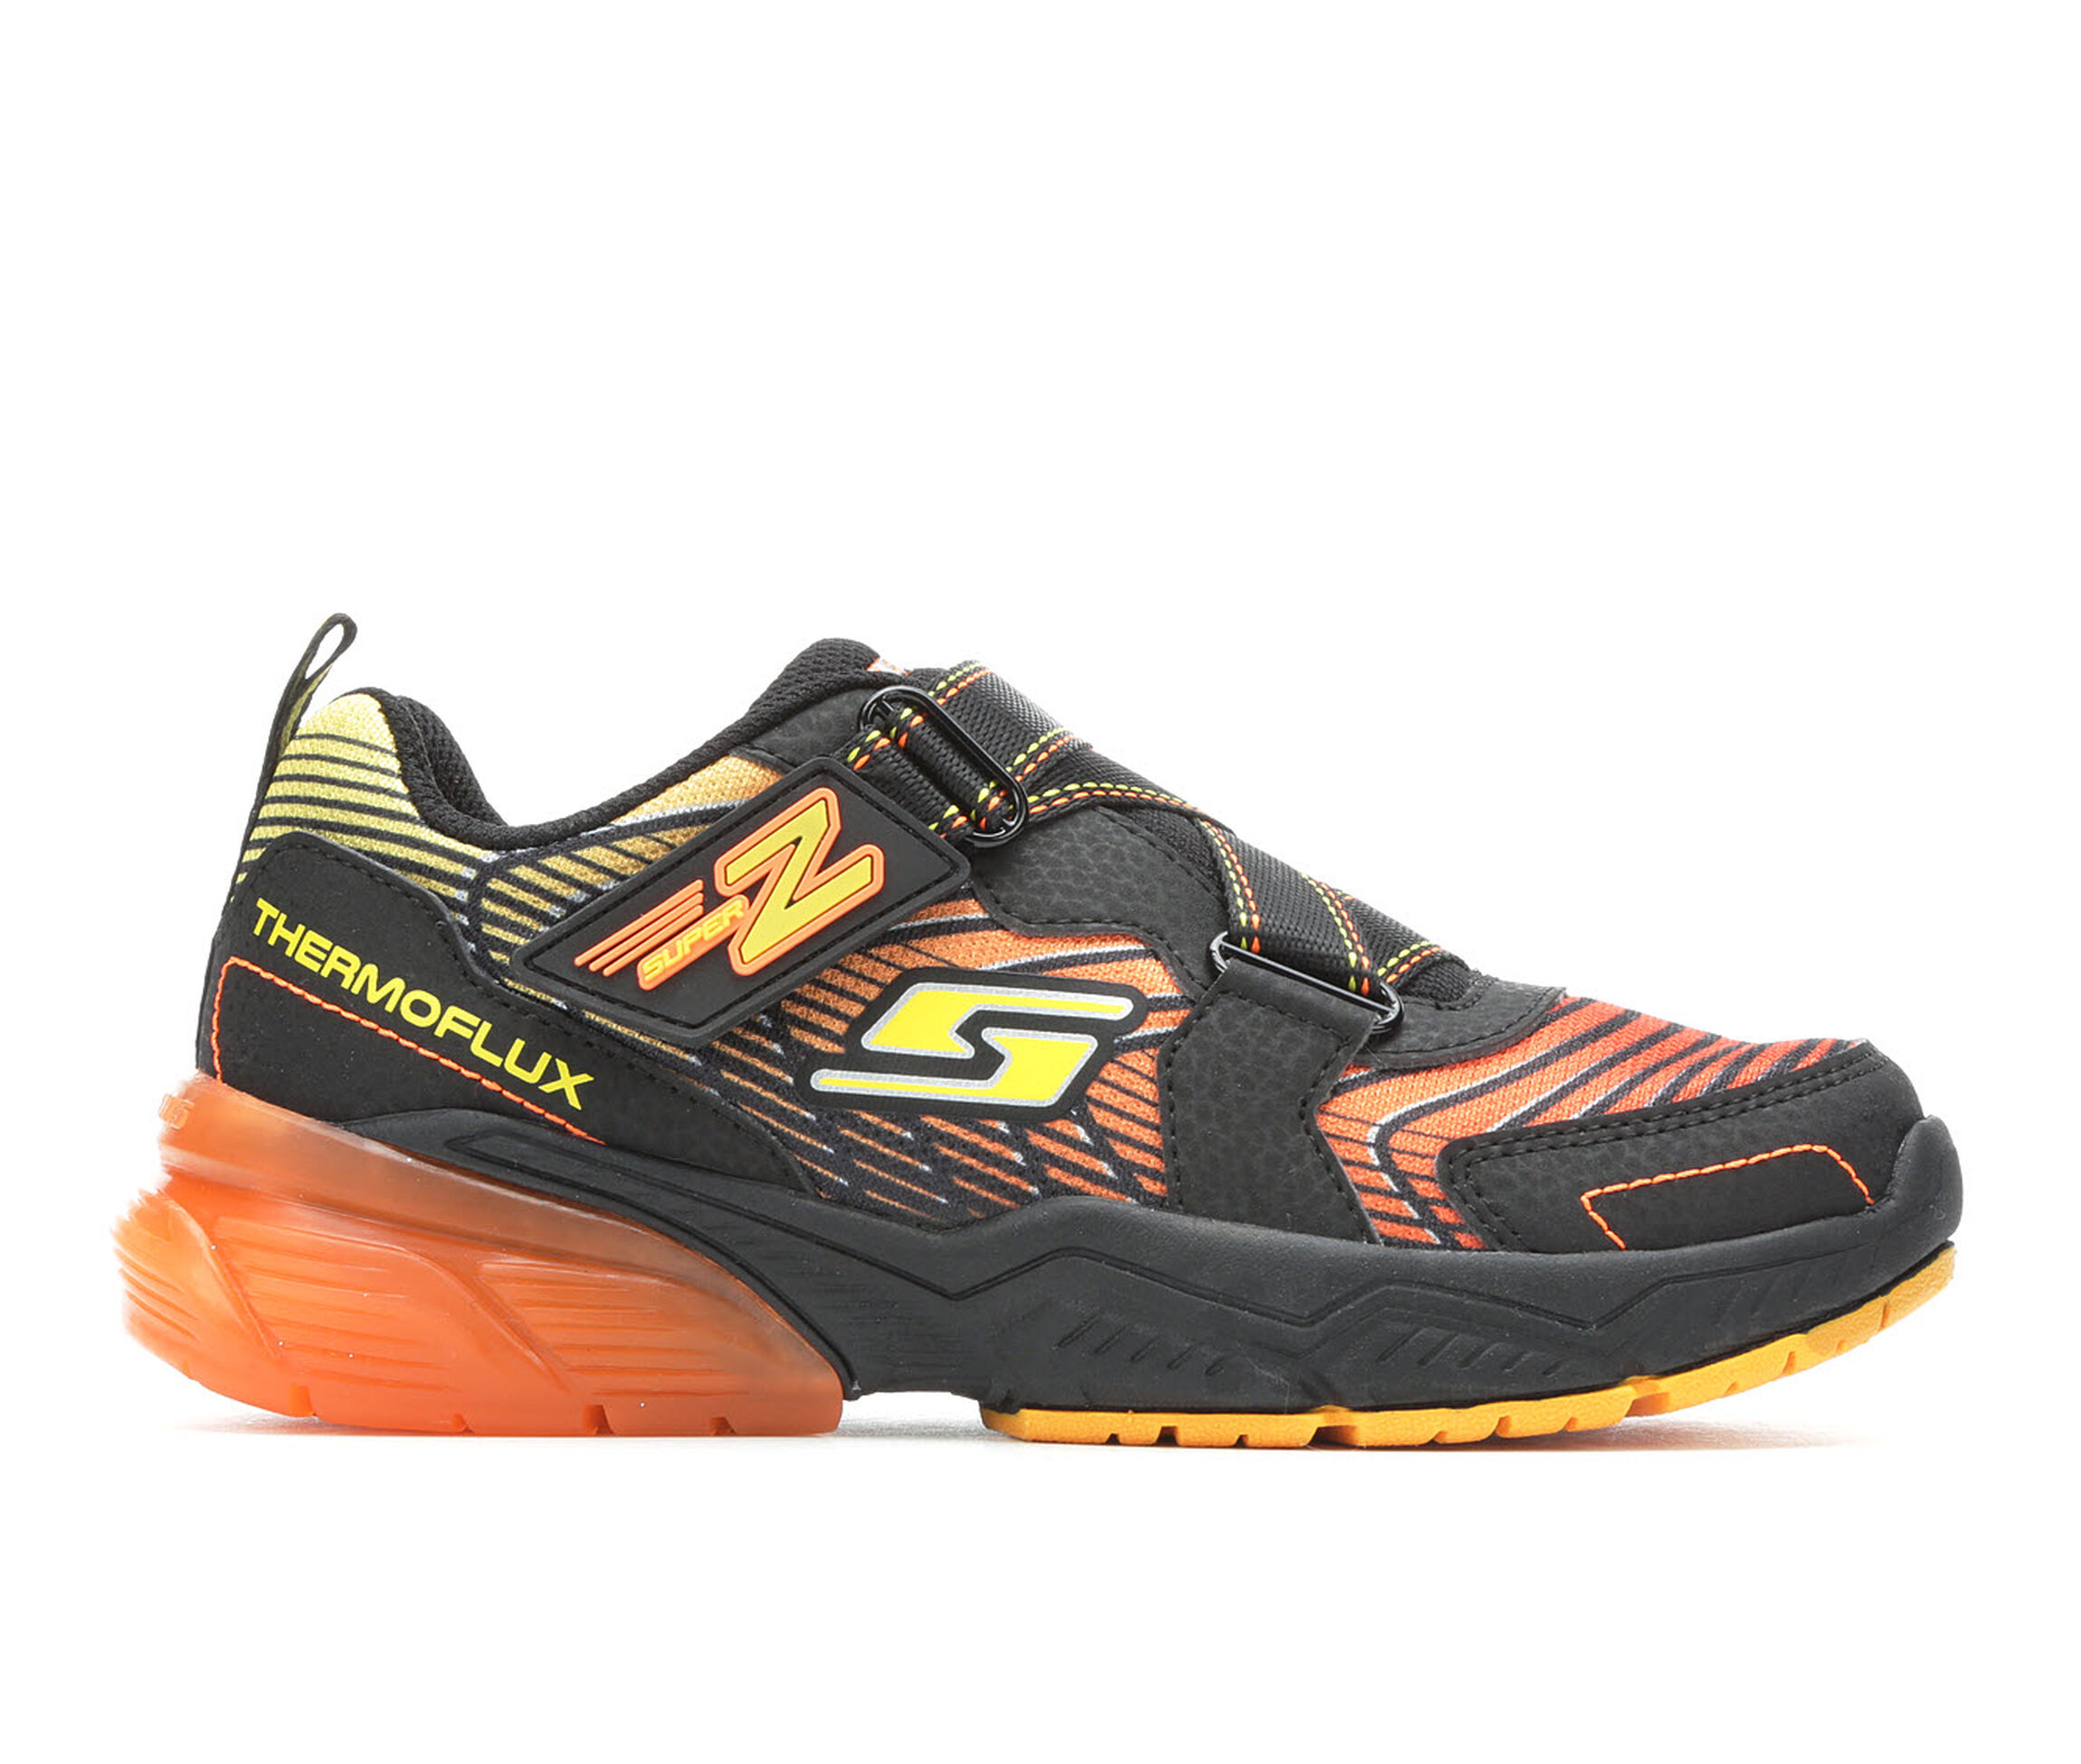 Big Kid Thermoflux 2.0 Wide Running Shoes